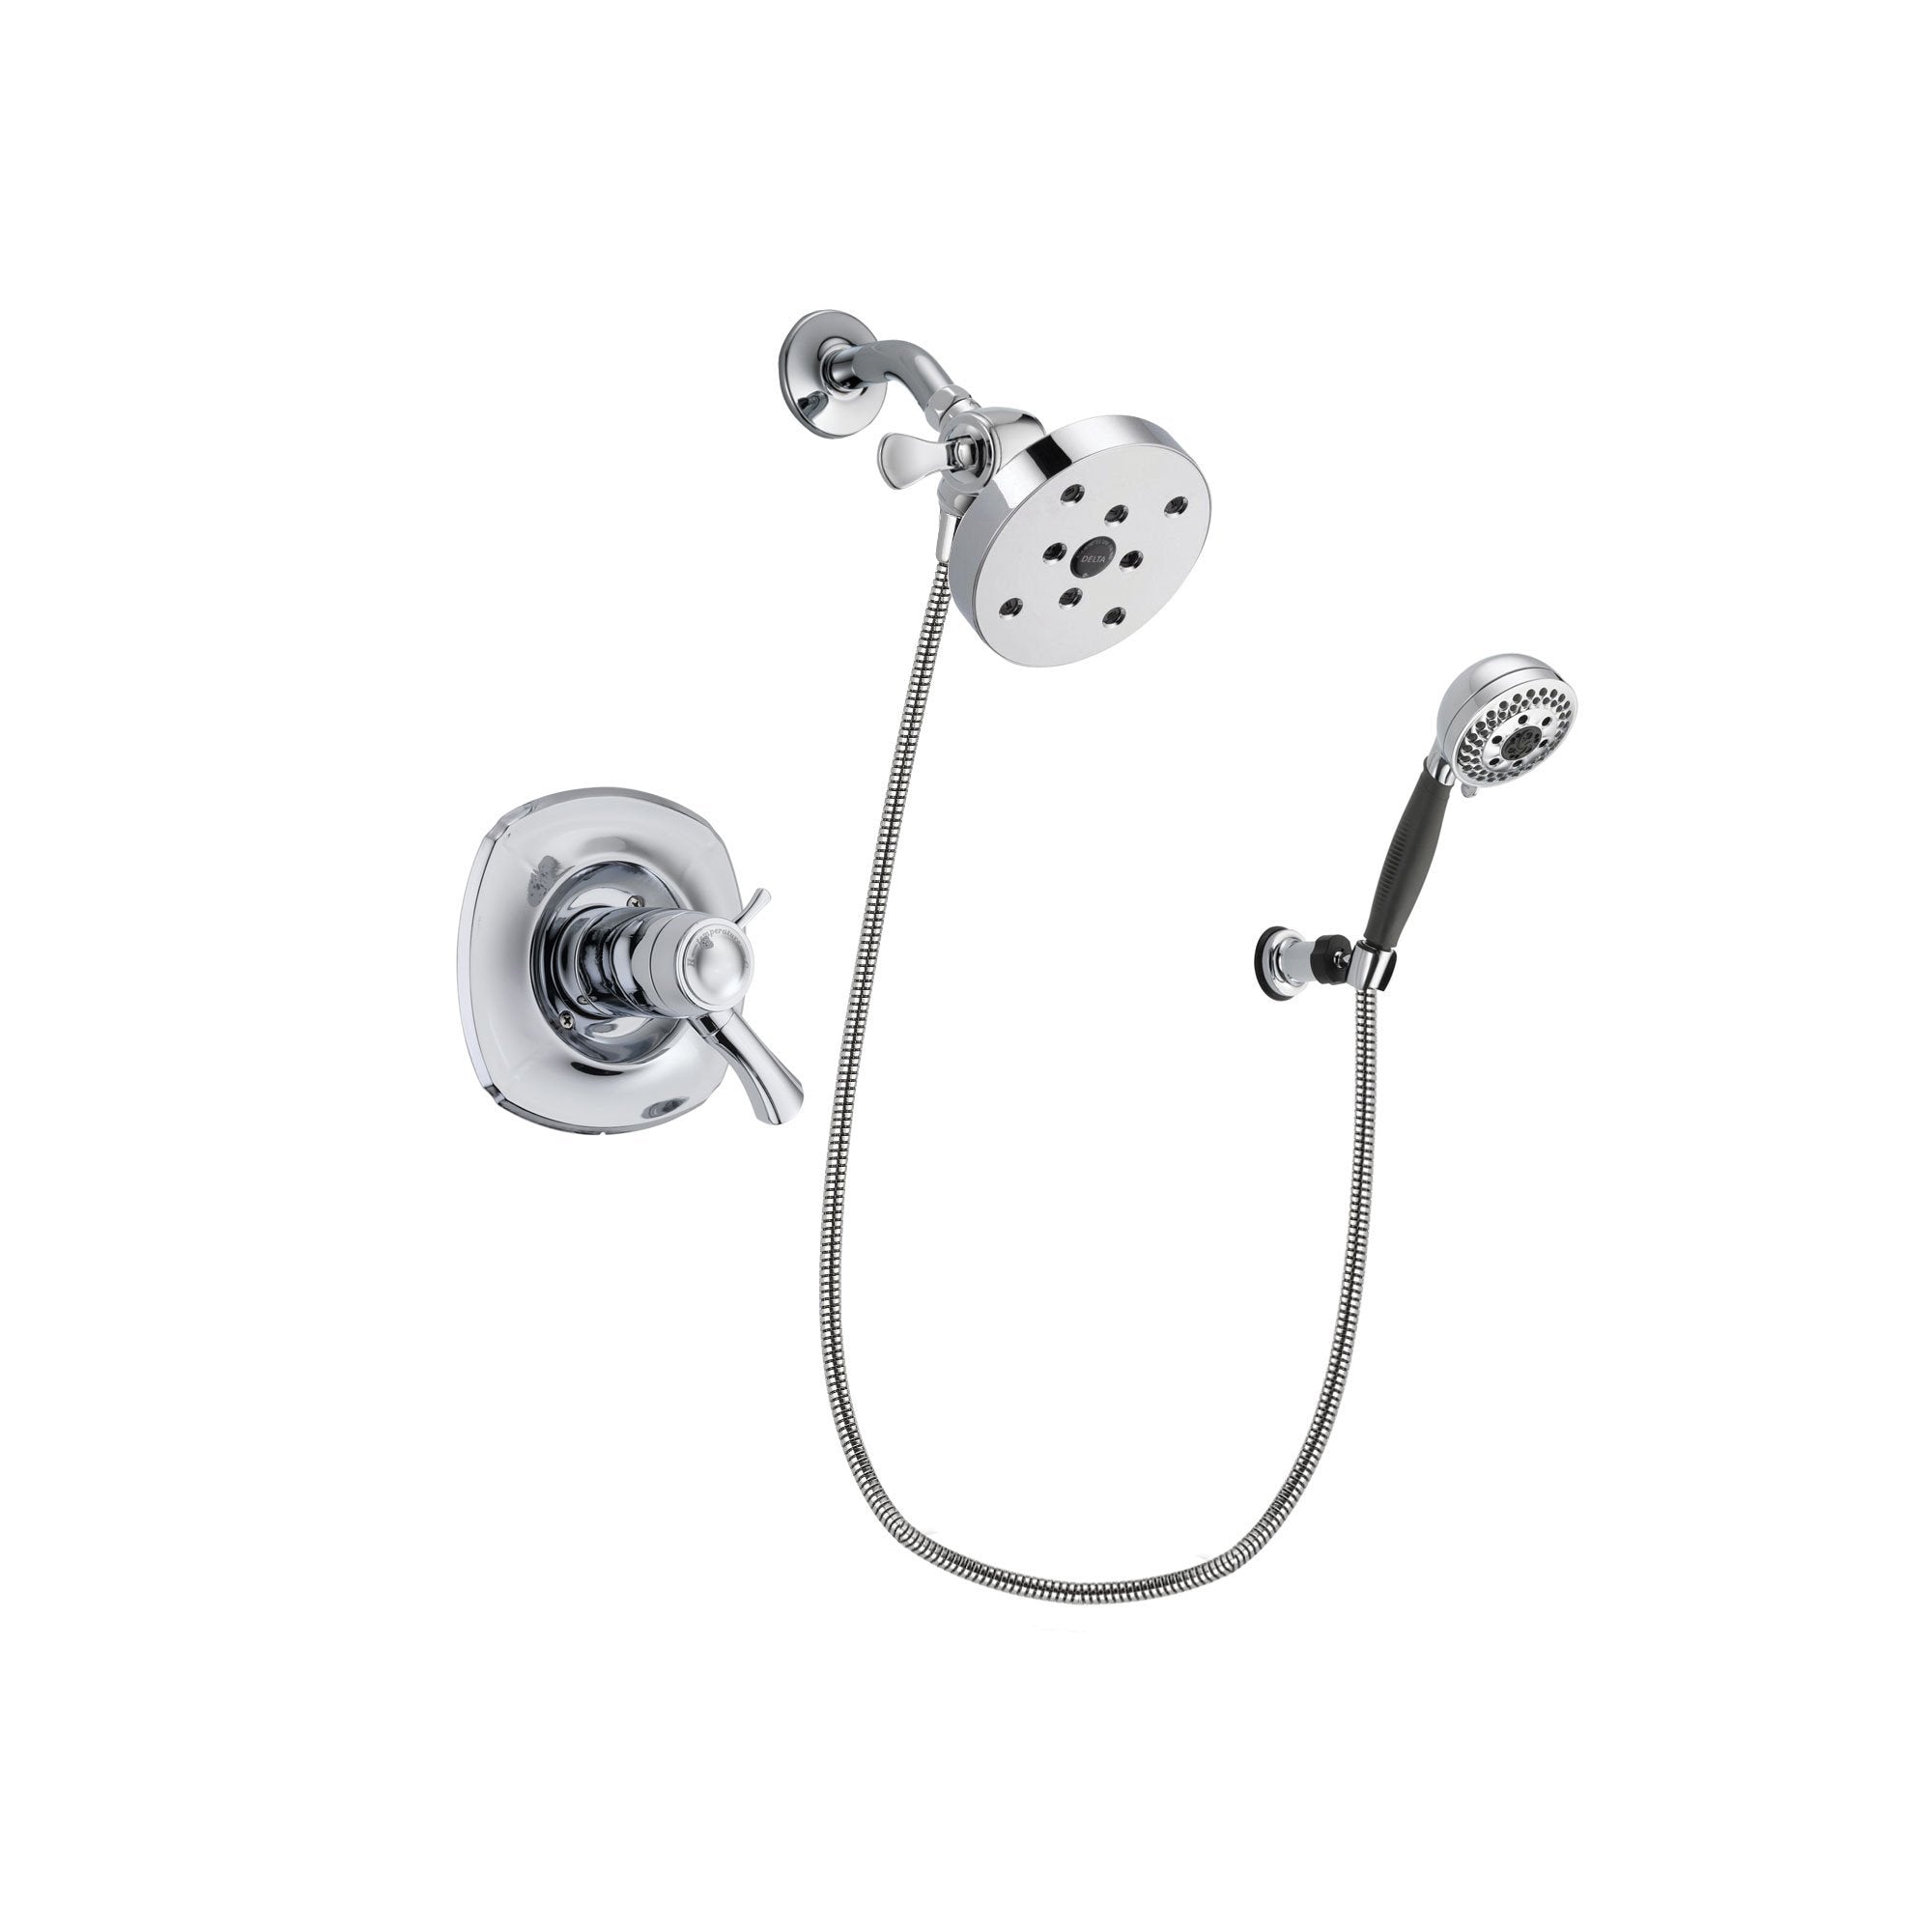 Delta Addison Chrome Finish Thermostatic Shower Faucet System Package with 5-1/2 inch Shower Head and 5-Spray Modern Handheld Shower with Wall Bracket and Hose Includes Rough-in Valve DSP1214V